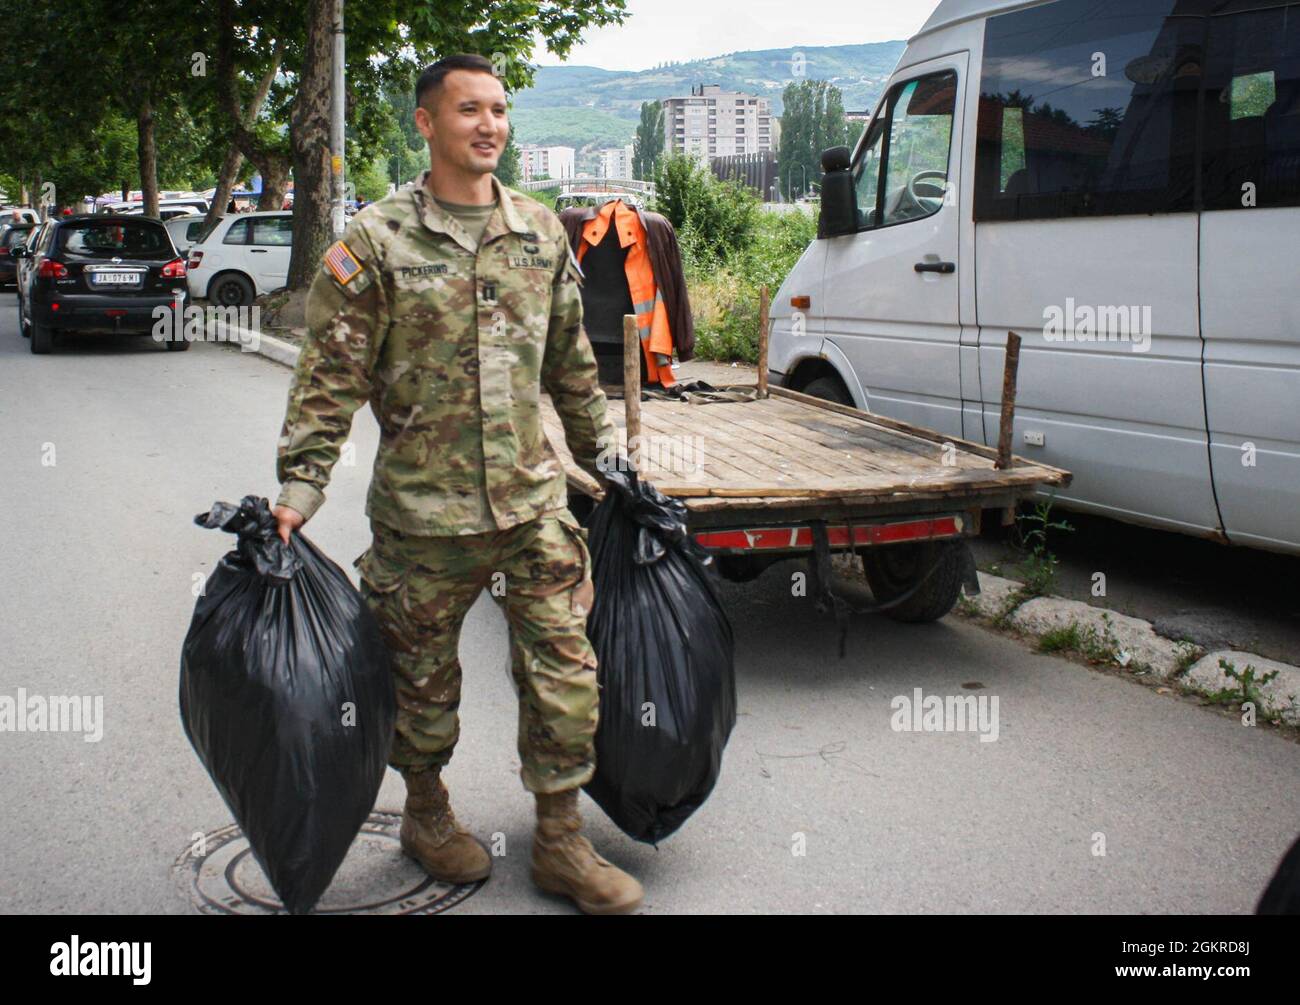 Capt. Chad Pickering, a public affairs officer assigned to Regional Command-East, Kosovo Force, carries trash in Mitrovica/Mitrovicë, Kosovo on June 19, 2021. Over 40 people volunteered to help with a community cleanup, including U.S. Soldiers and Swiss Armed Forces Soldiers and residents from both North and South Mitrovica/Mitrovicë. Stock Photo